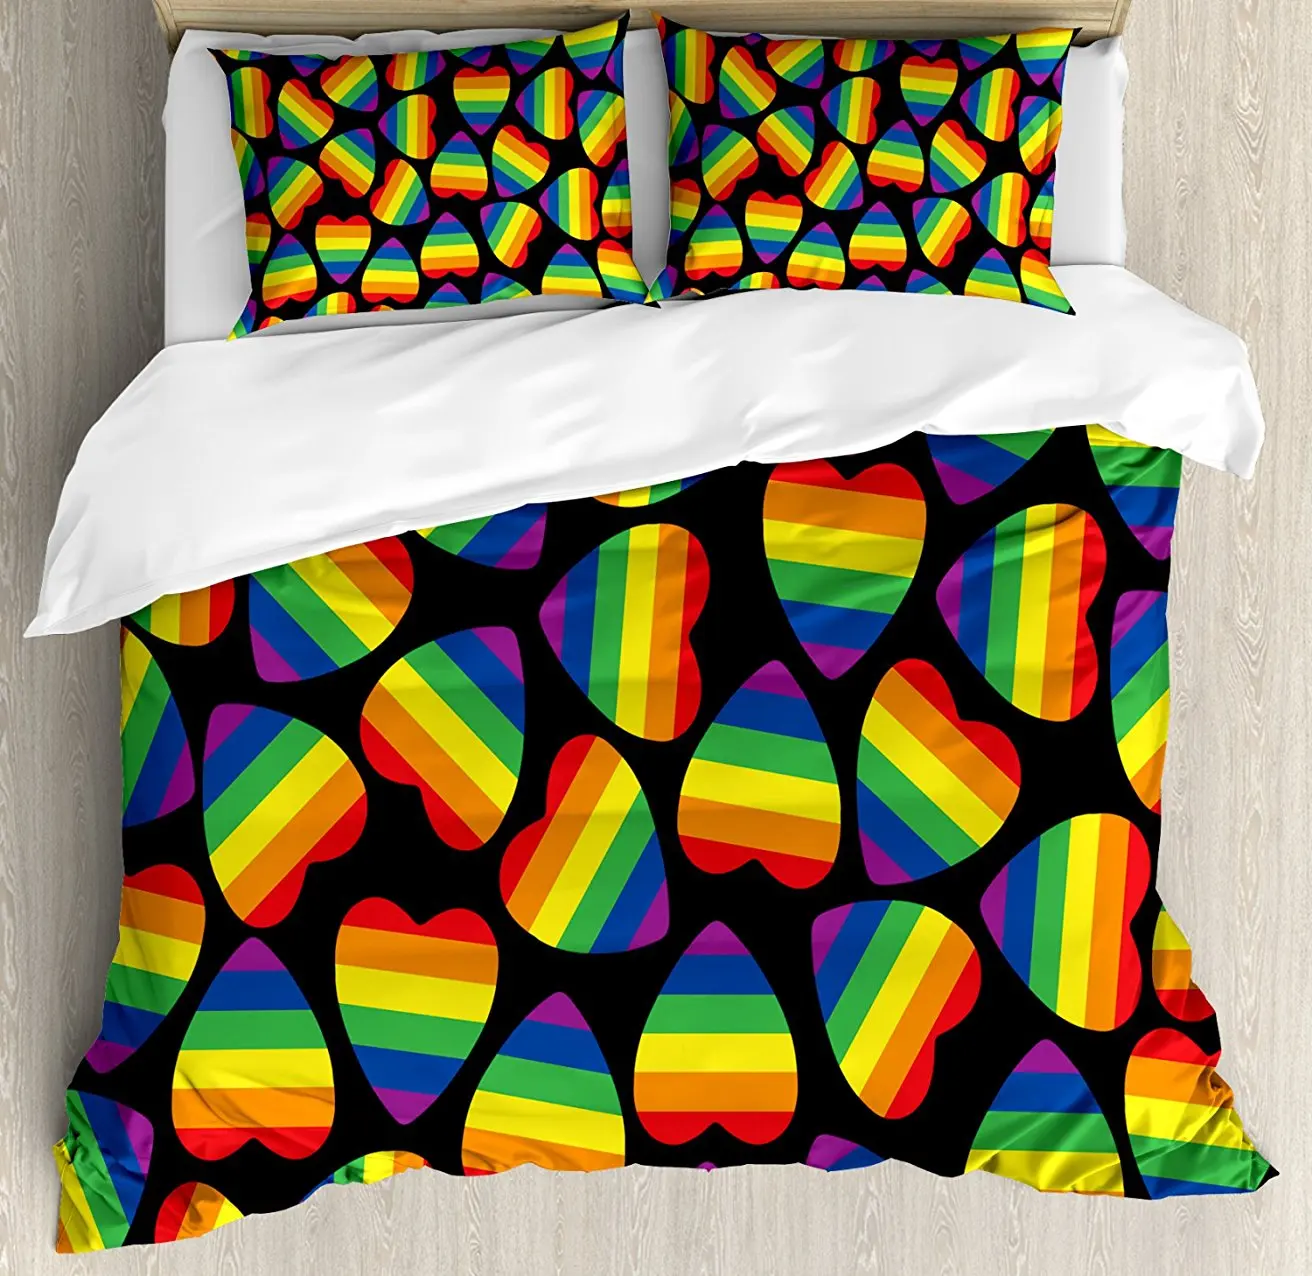 Blue Ambesonne Pride Duvet Cover Set Decorative 2 Piece Bedding Set with 1 Pillow Sham Twin Size Earth from Space with Continents in The LGBT Colors Universal Worldwide Love Freedom 